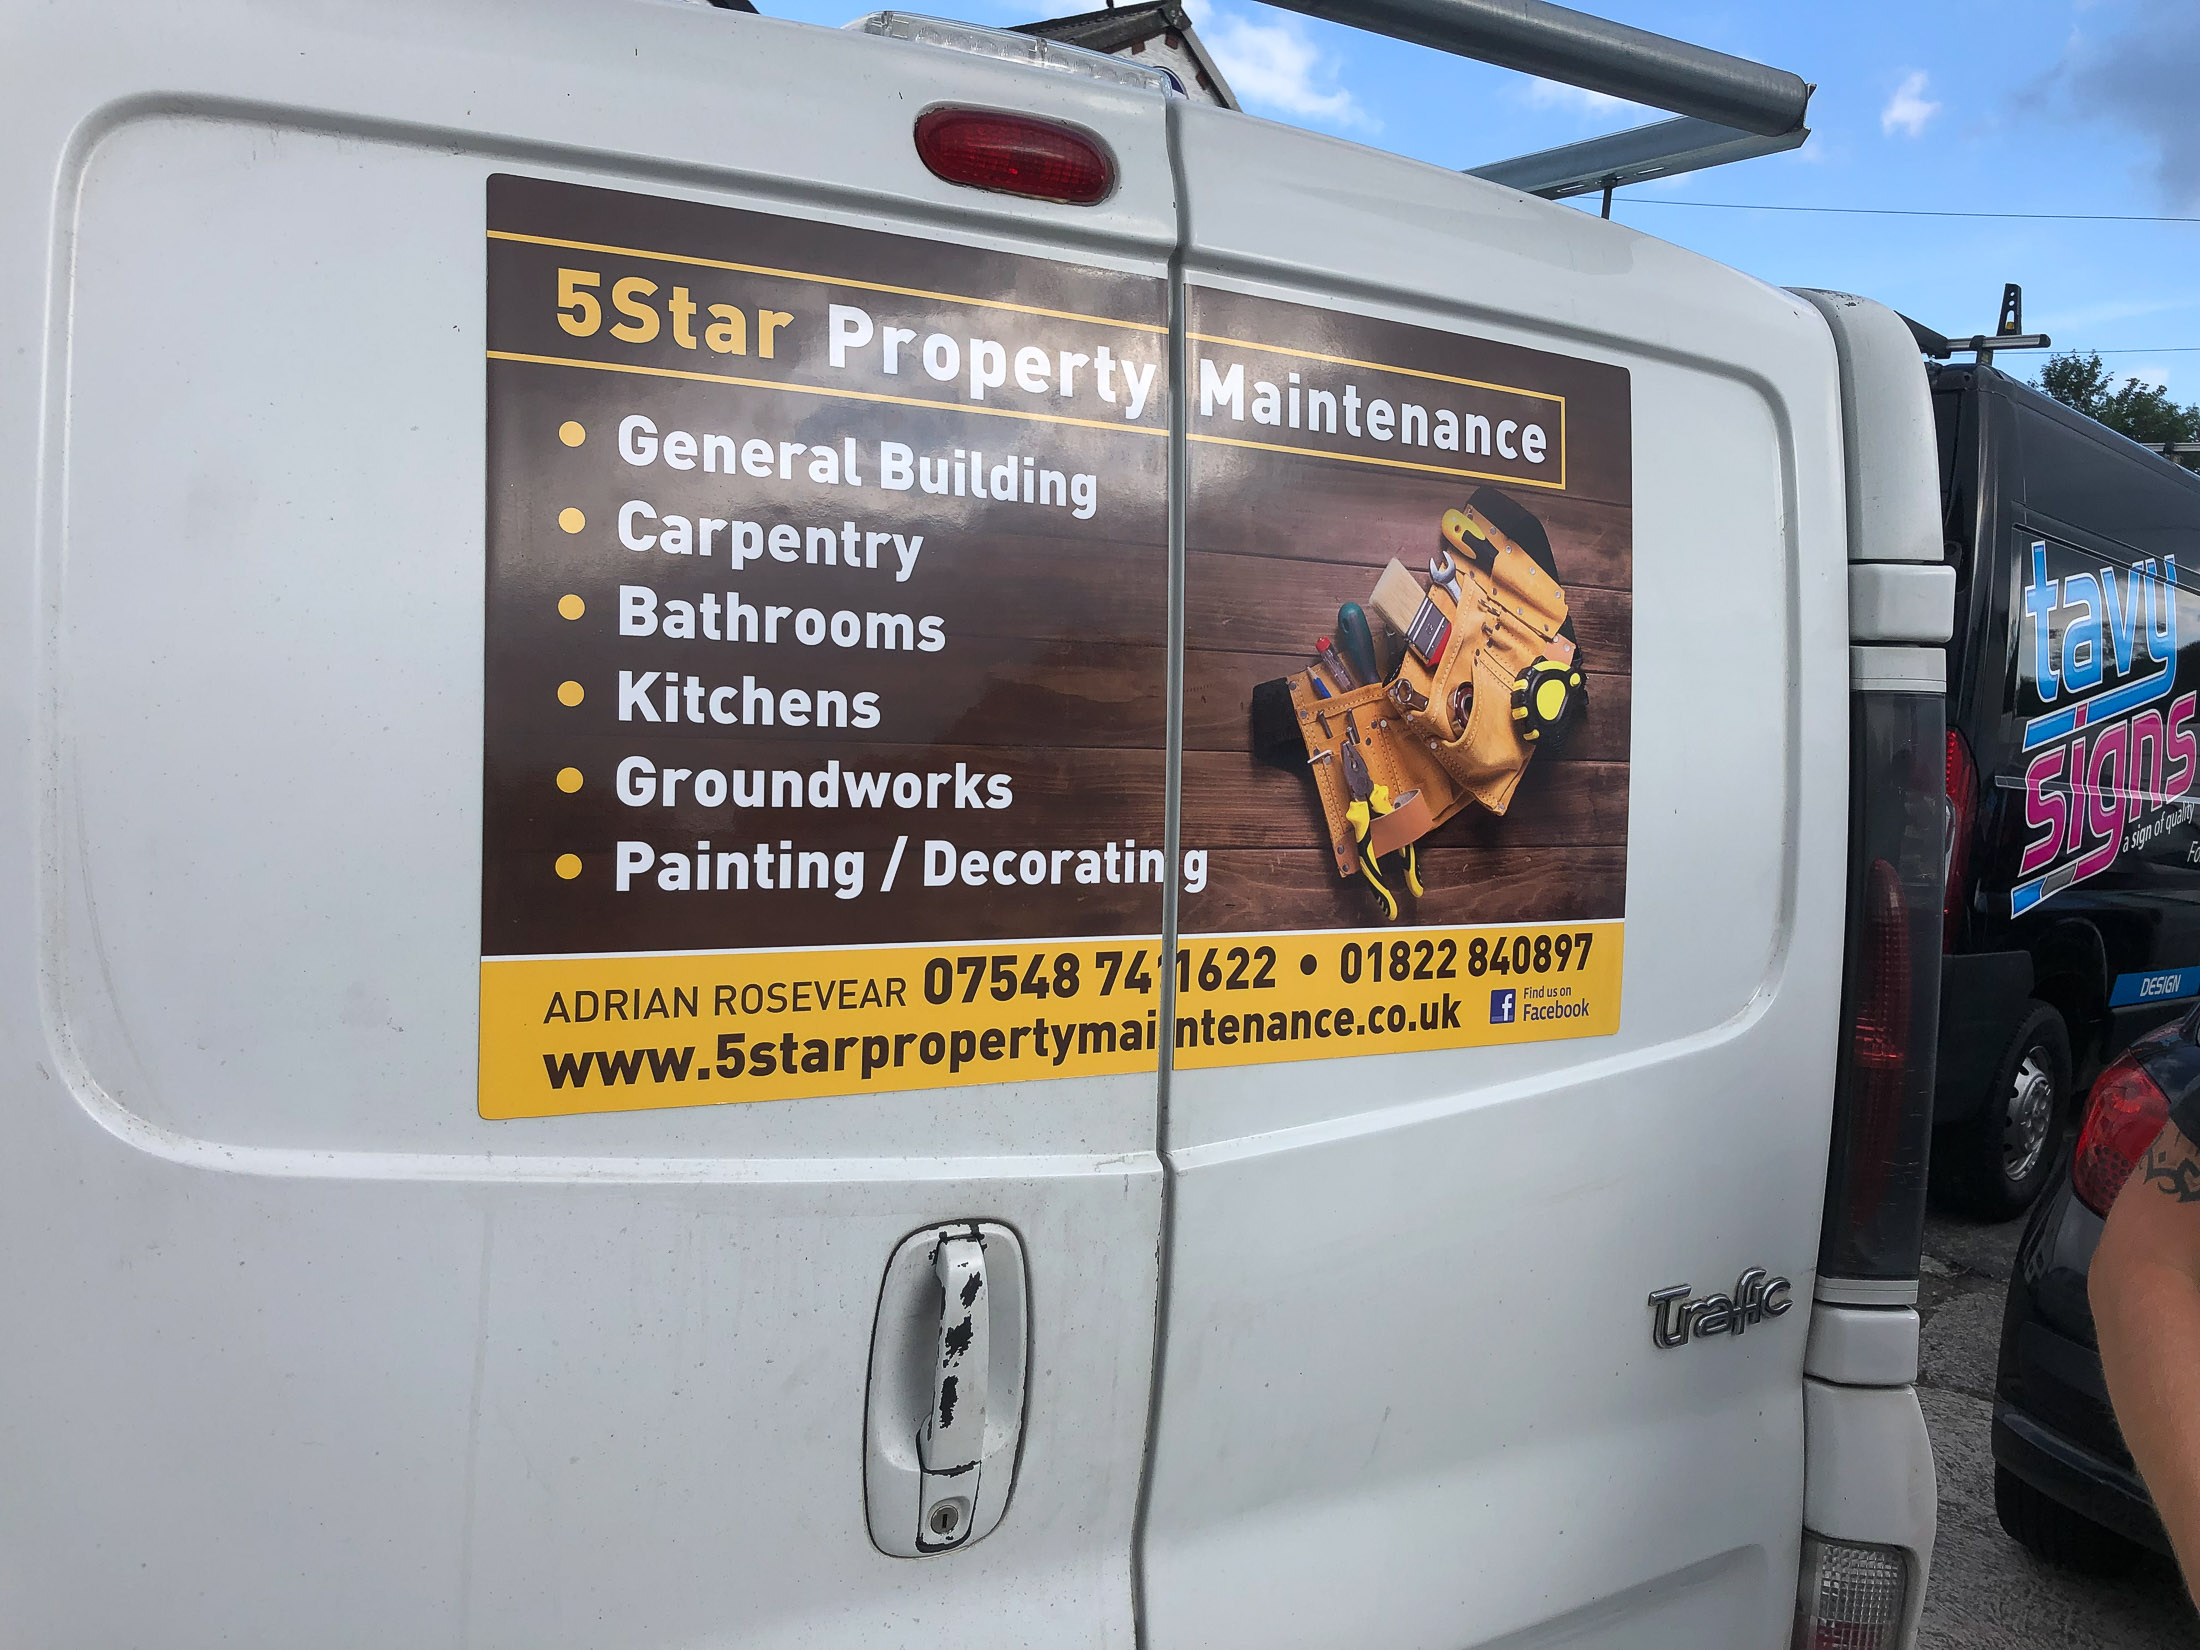 magnetic banners for vans